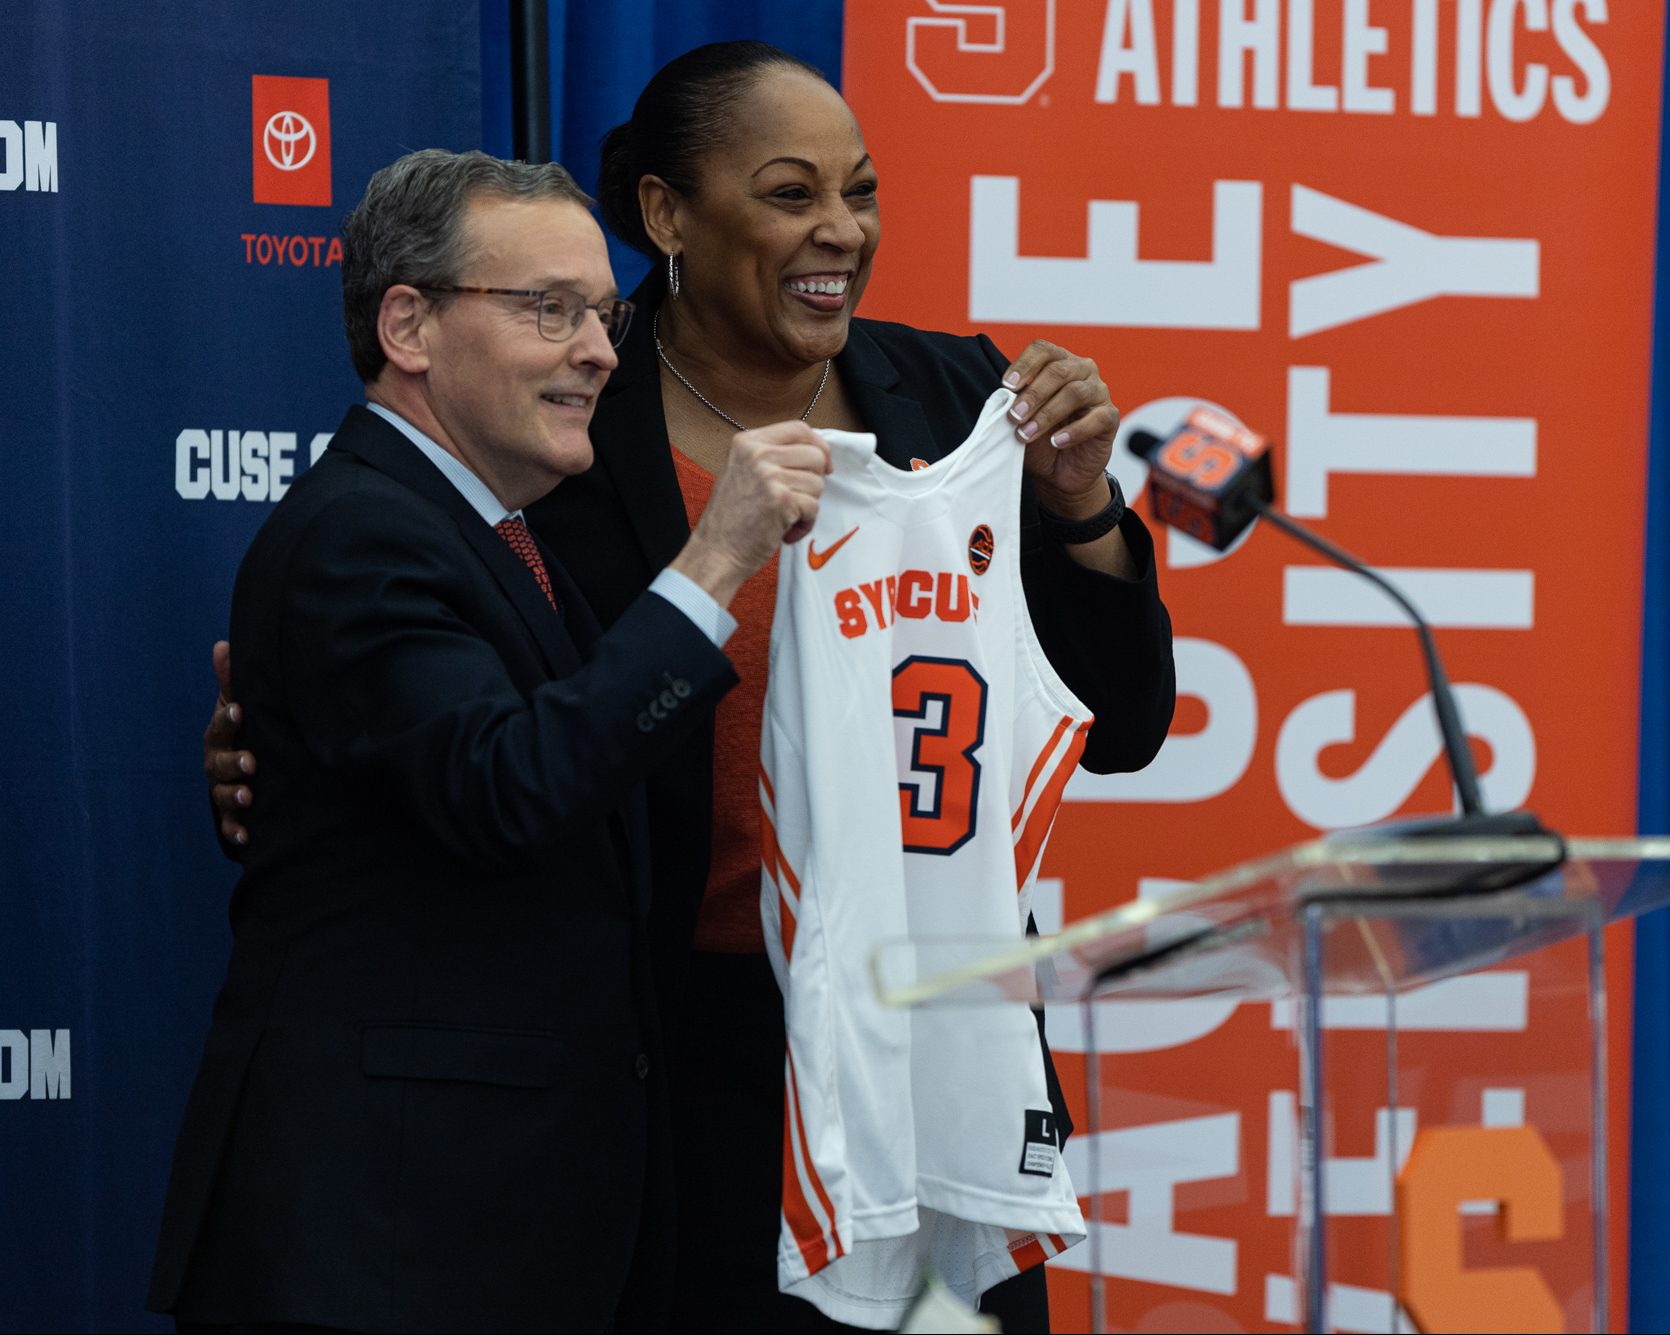 Felisha Legette-Jack and SU athletic director John Wildhack hold up a jersey with Felisha's name on it in the Melo Center on March 28th, 2022.